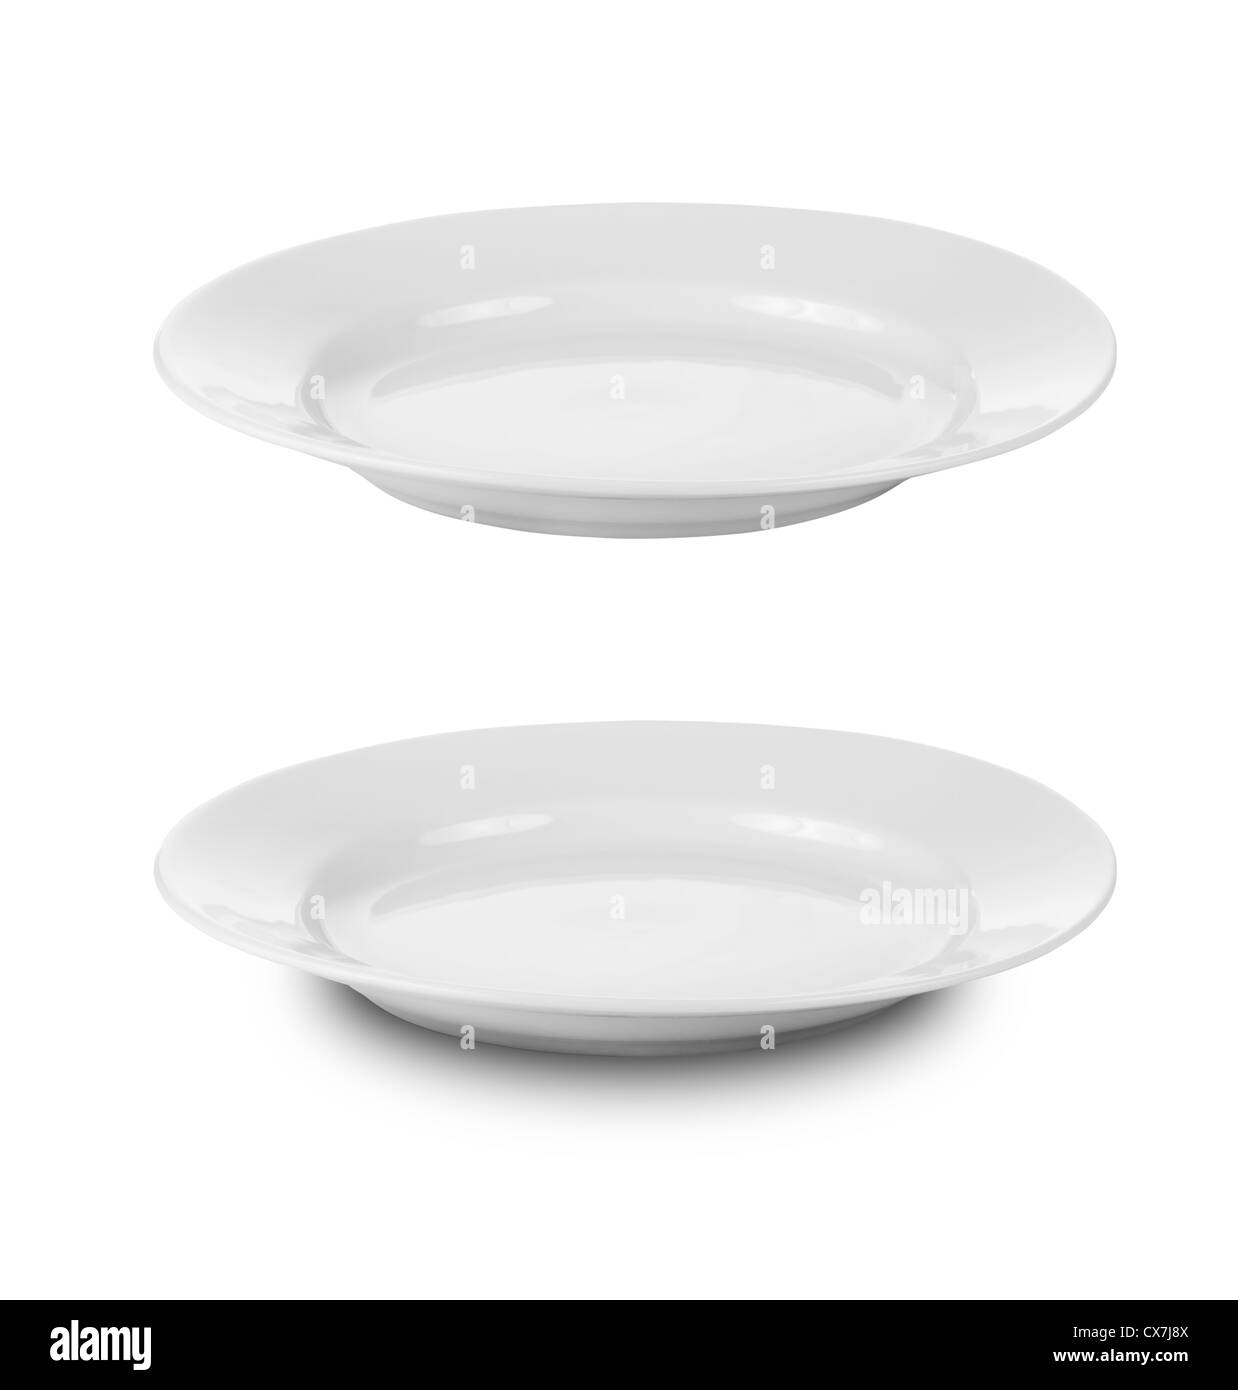 round plate or dishe isolated on white with clipping path included Stock Photo